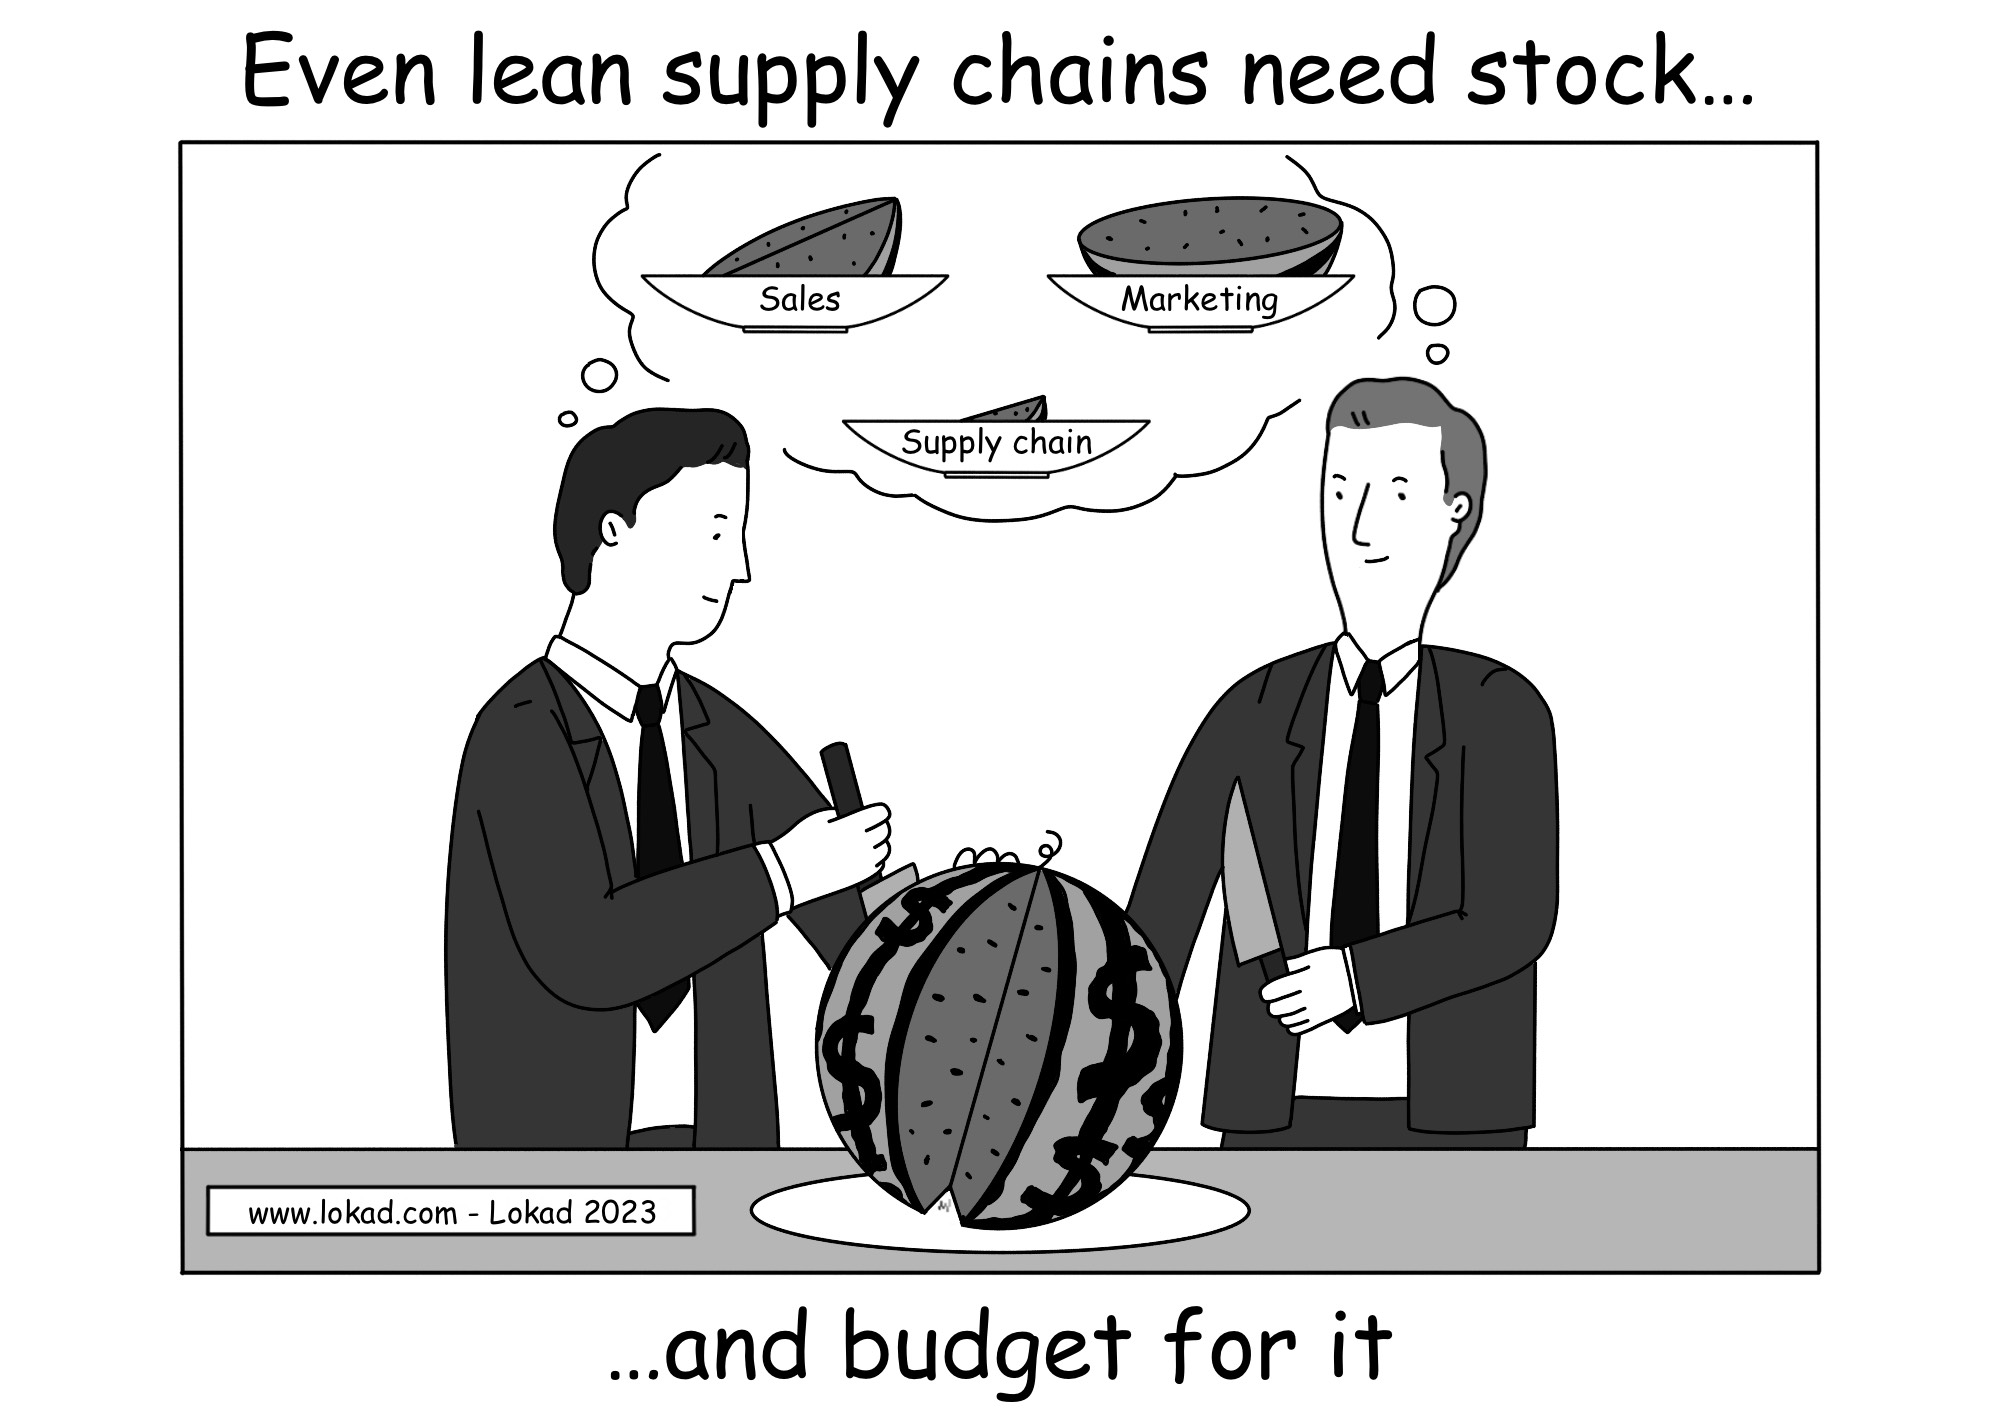 A supply chain comic created by Lokad. Title: Even lean supply chains need stock and budget for it. Two executives, possibly the CEO and CFO, are slicing a watermelon representing a company's budget. The watermelon has a skin with a dollar symbol pattern. Marketing receives the largest portion, nearly half, sales gets almost a quarter, and supply chain gets the smallest piece.